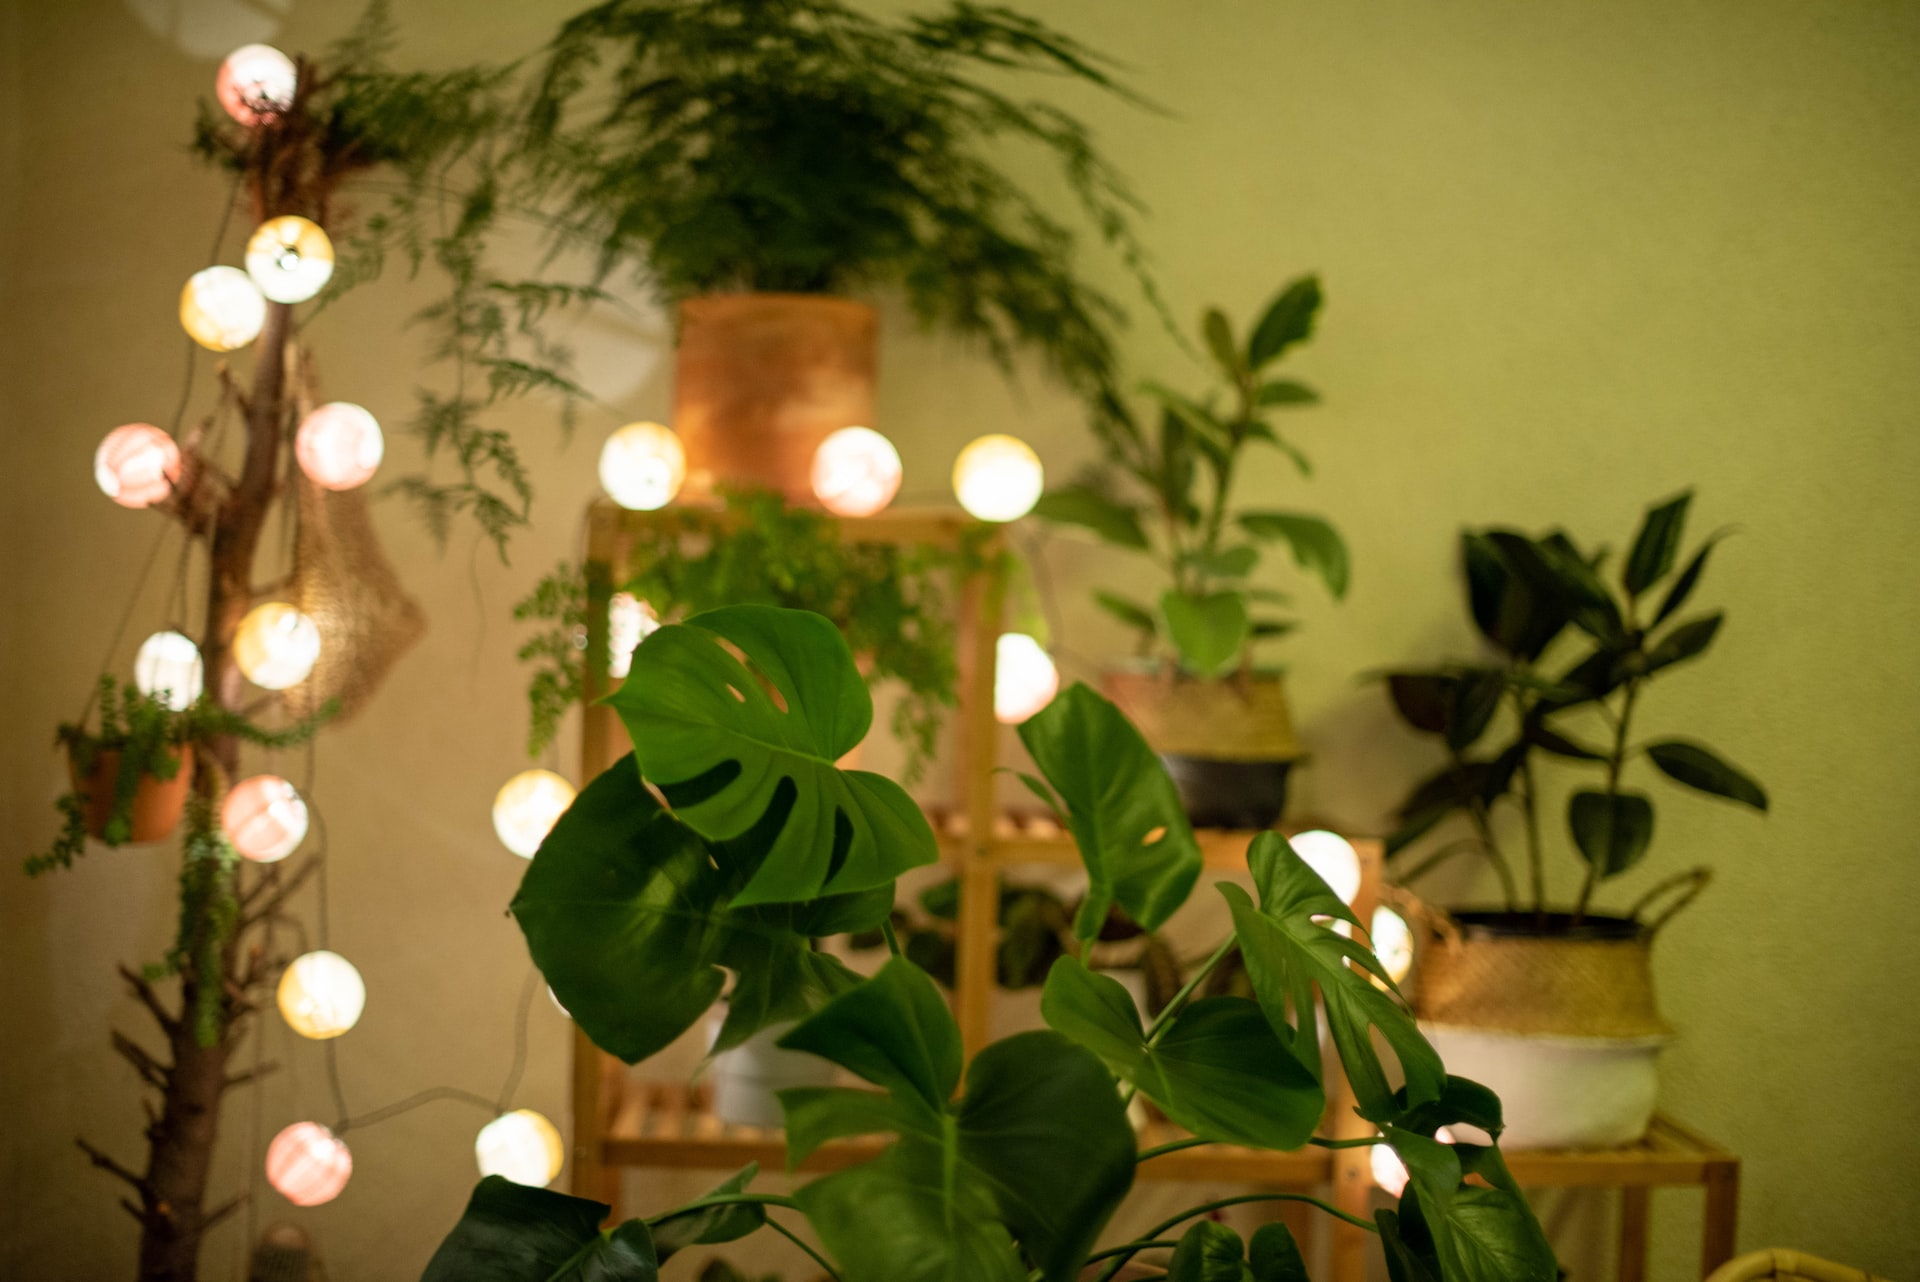 Green plants decorated with small LED lights.